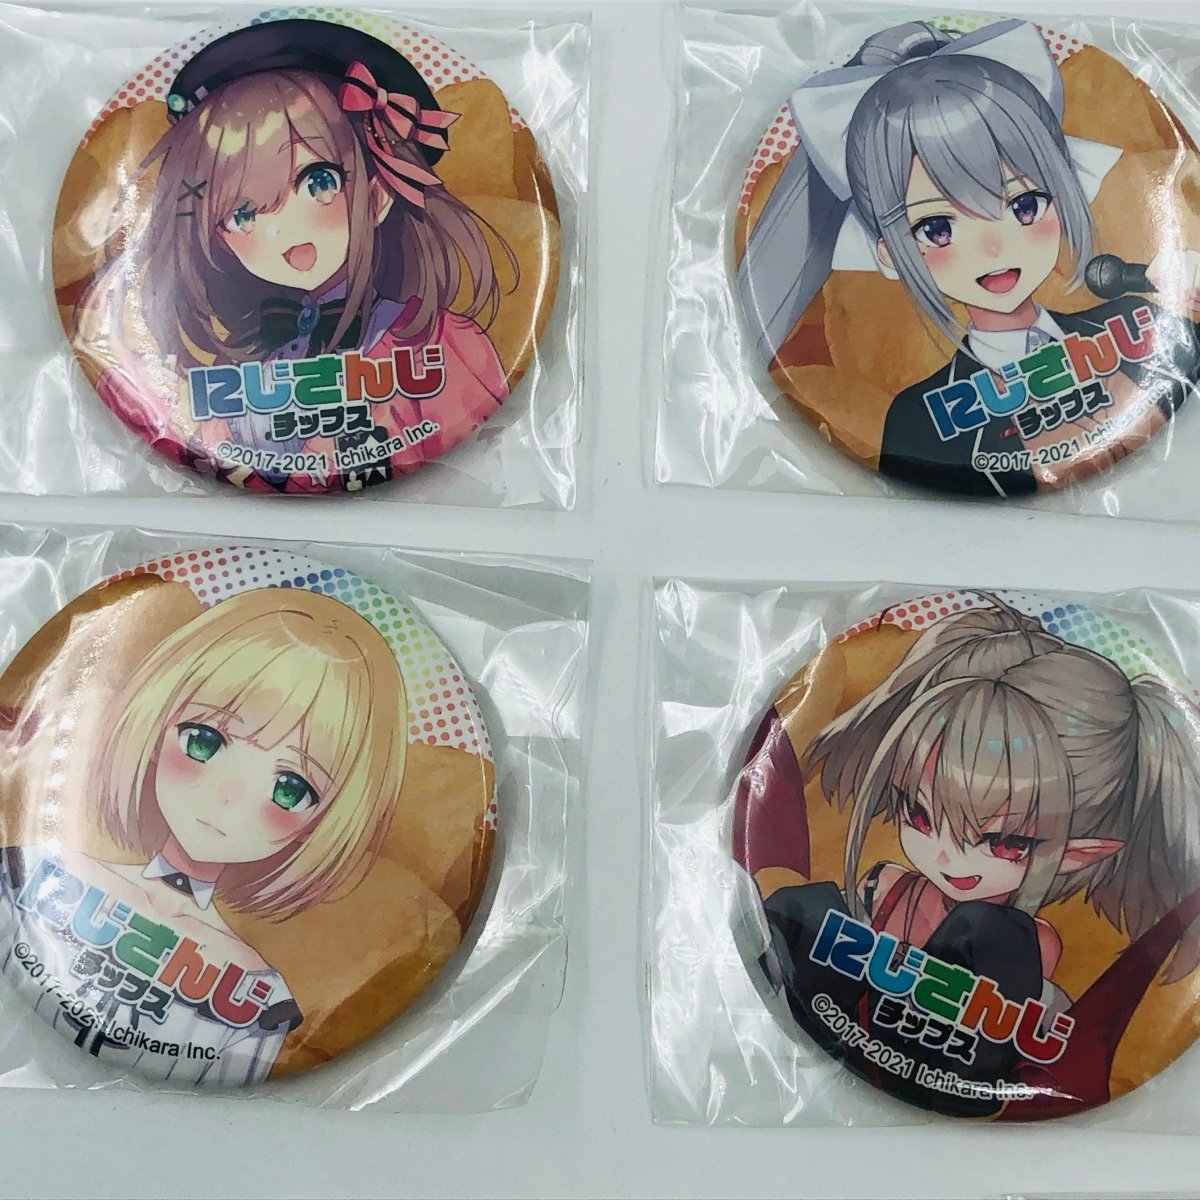  new goods unopened .. san . chip s can badge 8 kind set string month wistaria .. other 